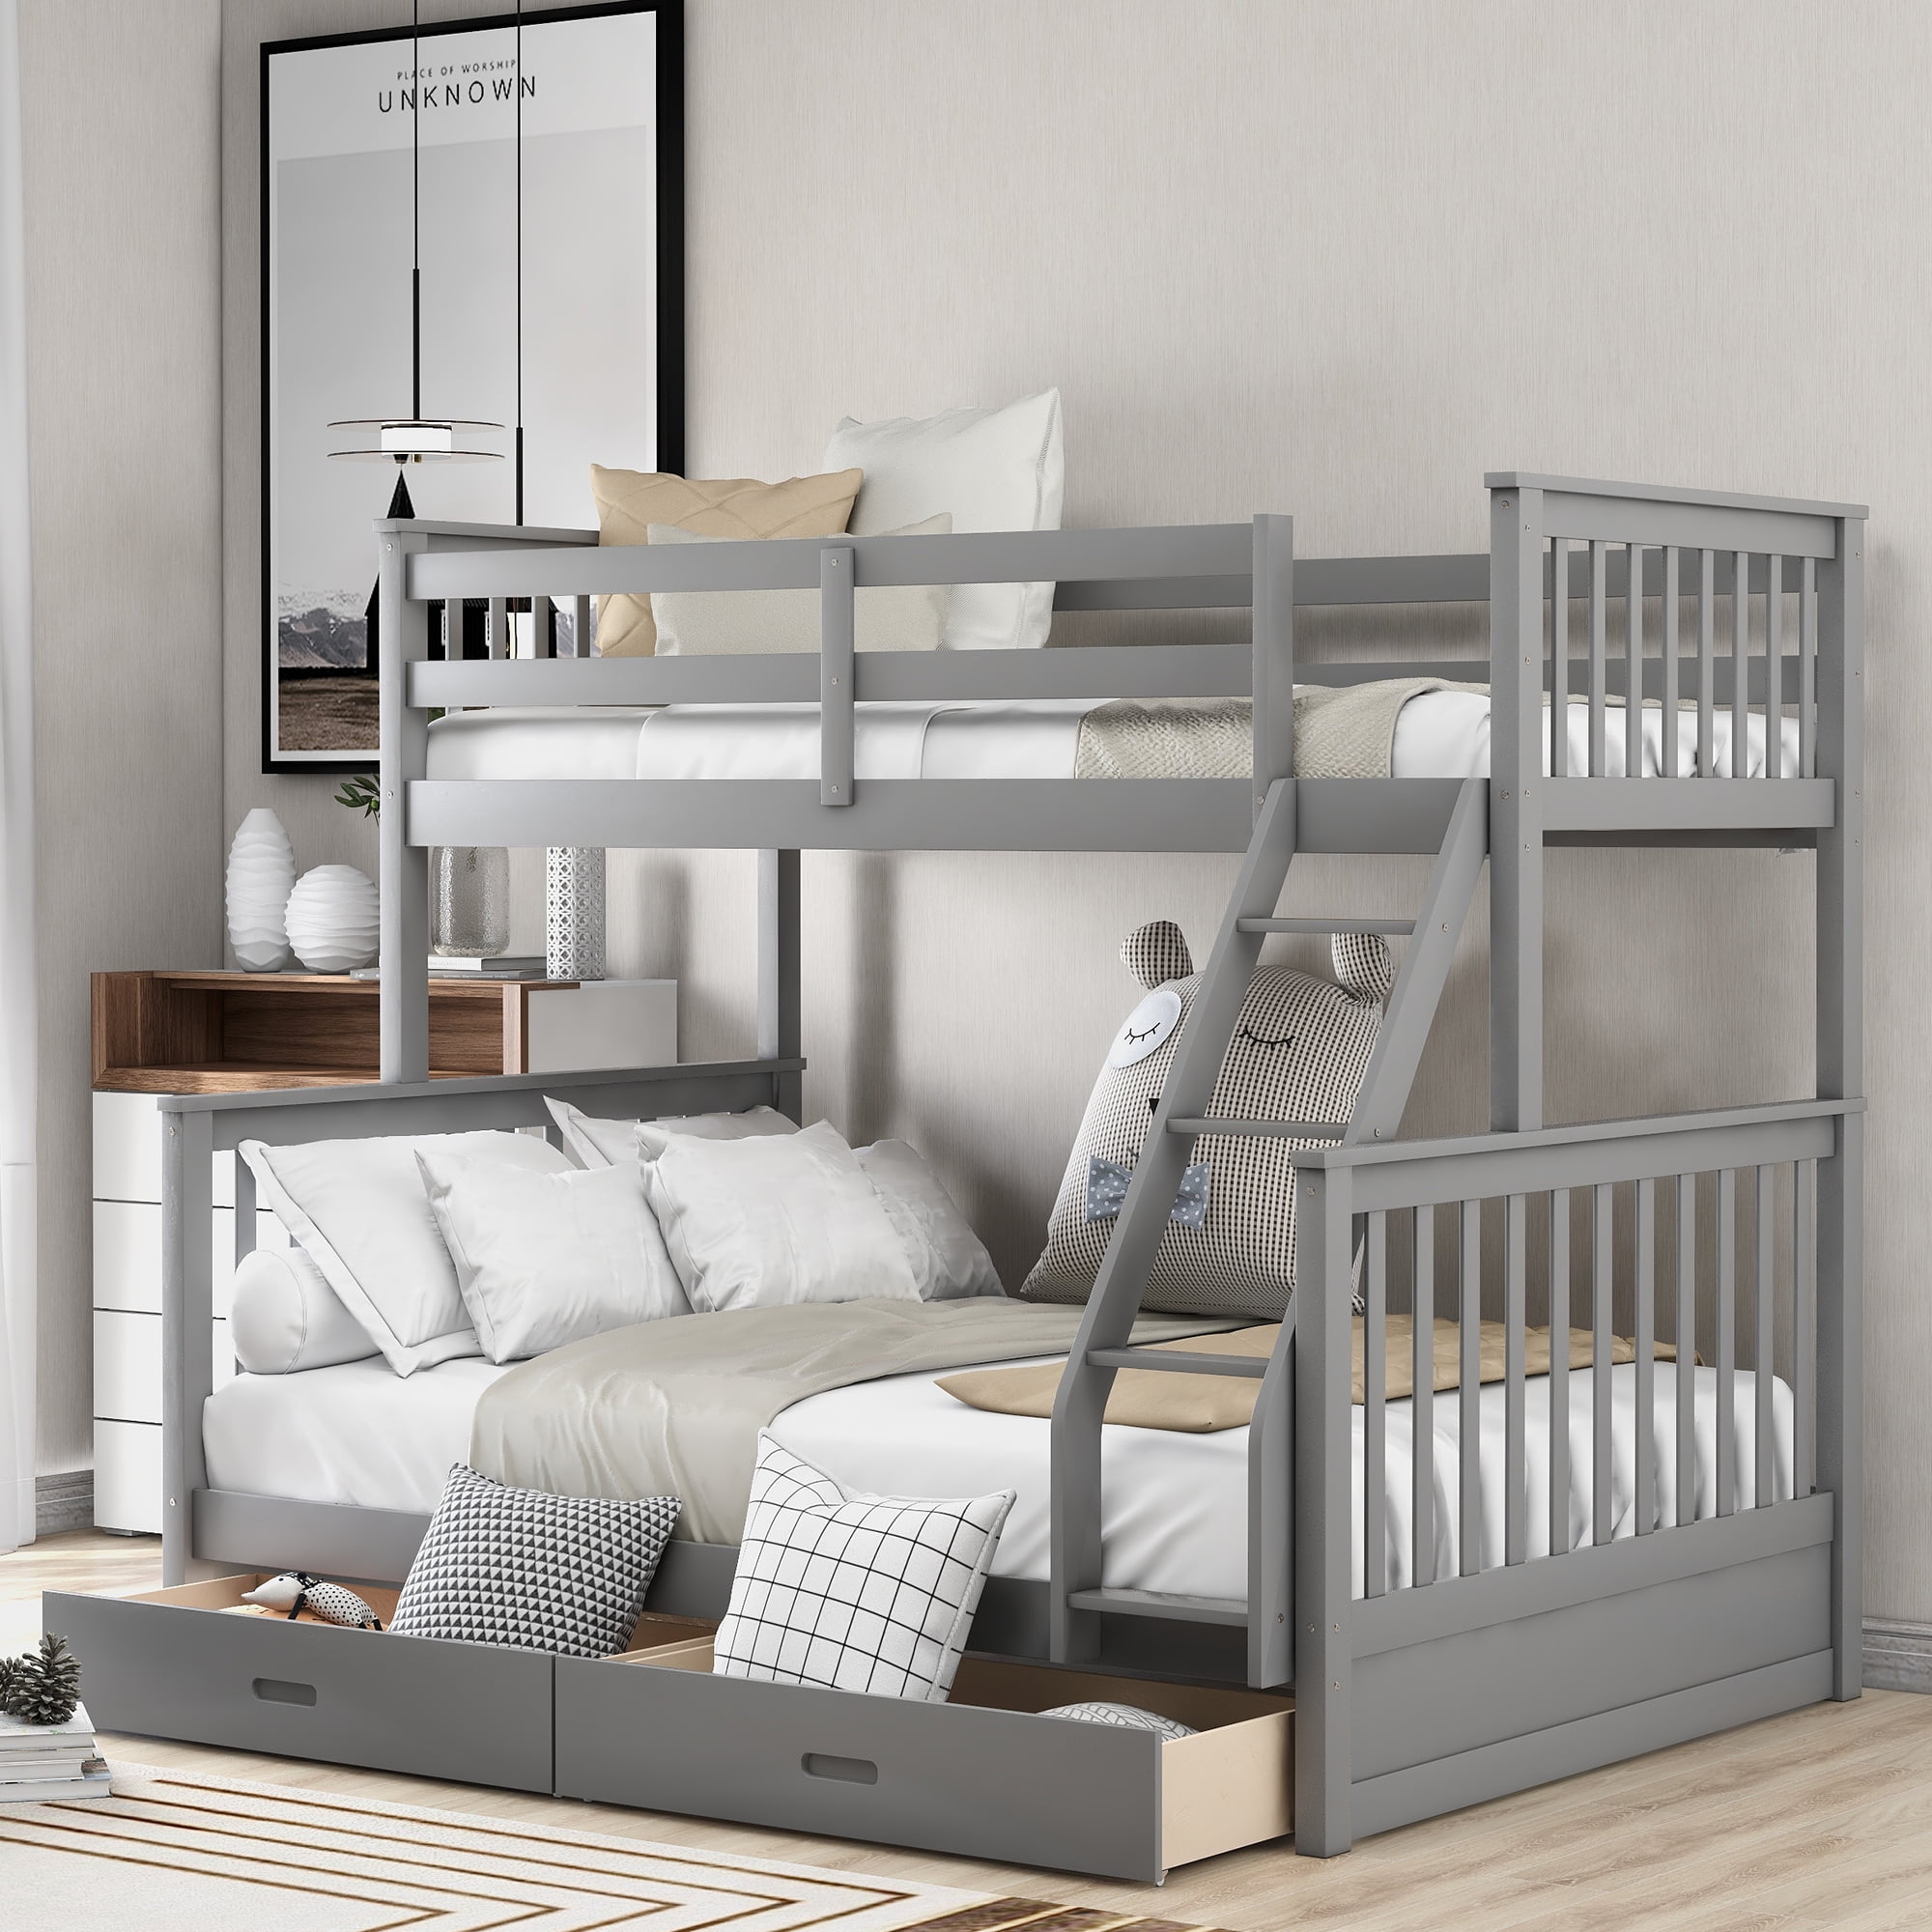 Convertible Twin Over Full Bunk Bed, Solid Wood Twin Over Full Bunk Bed With Storage